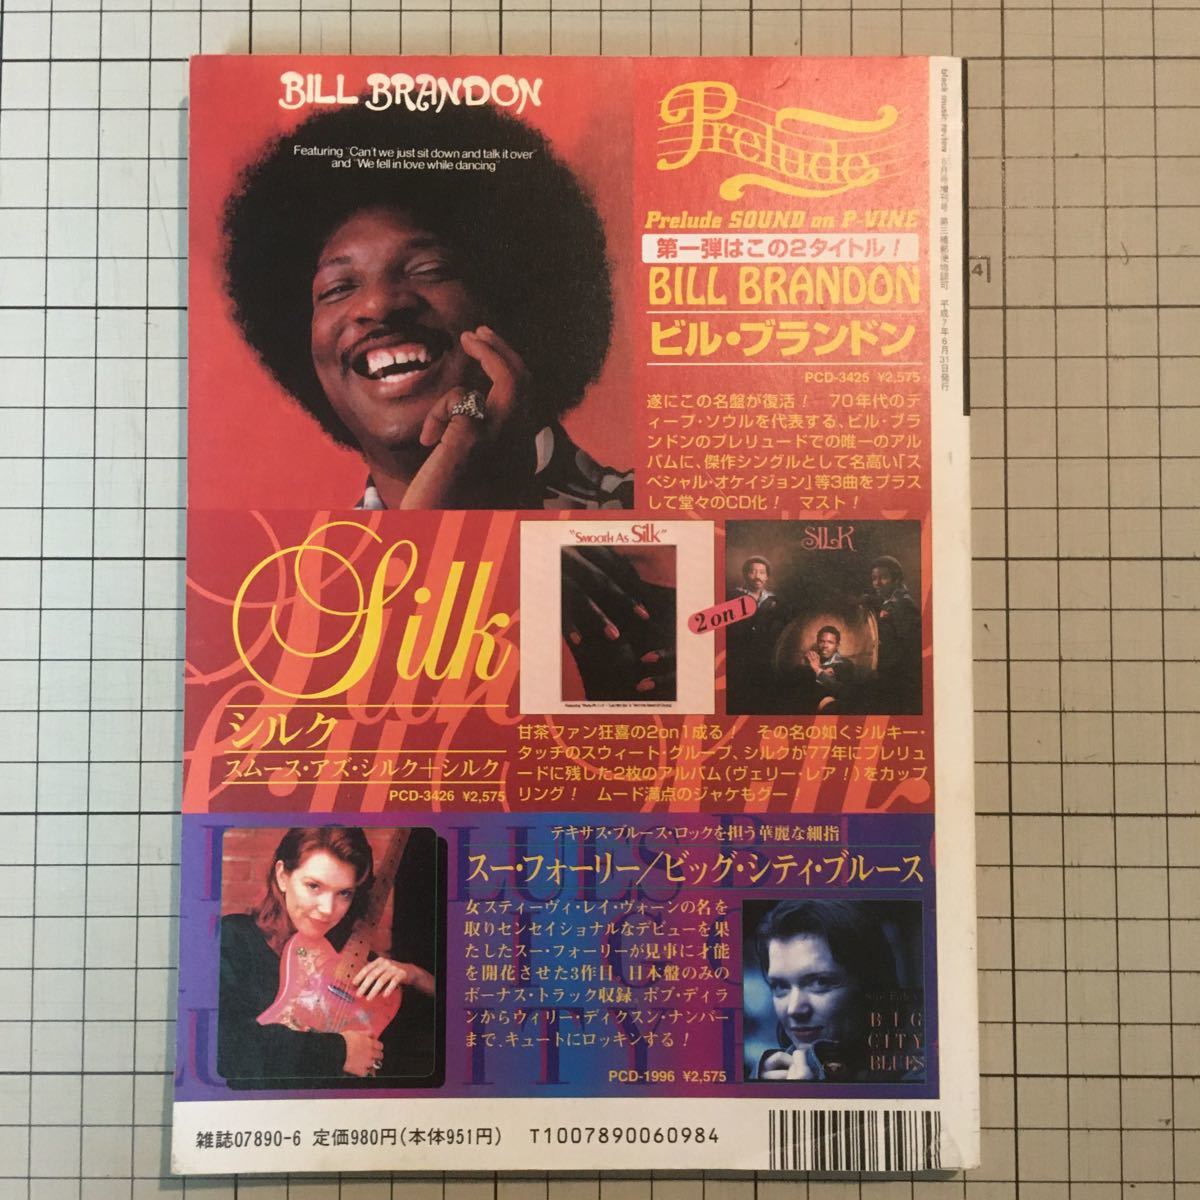  blues & soul reko-zNO.5 [ special collection blues. new wave / Sam * Cook. . production / John * Lee *f car * inter view Heisei era 7 year issue ]